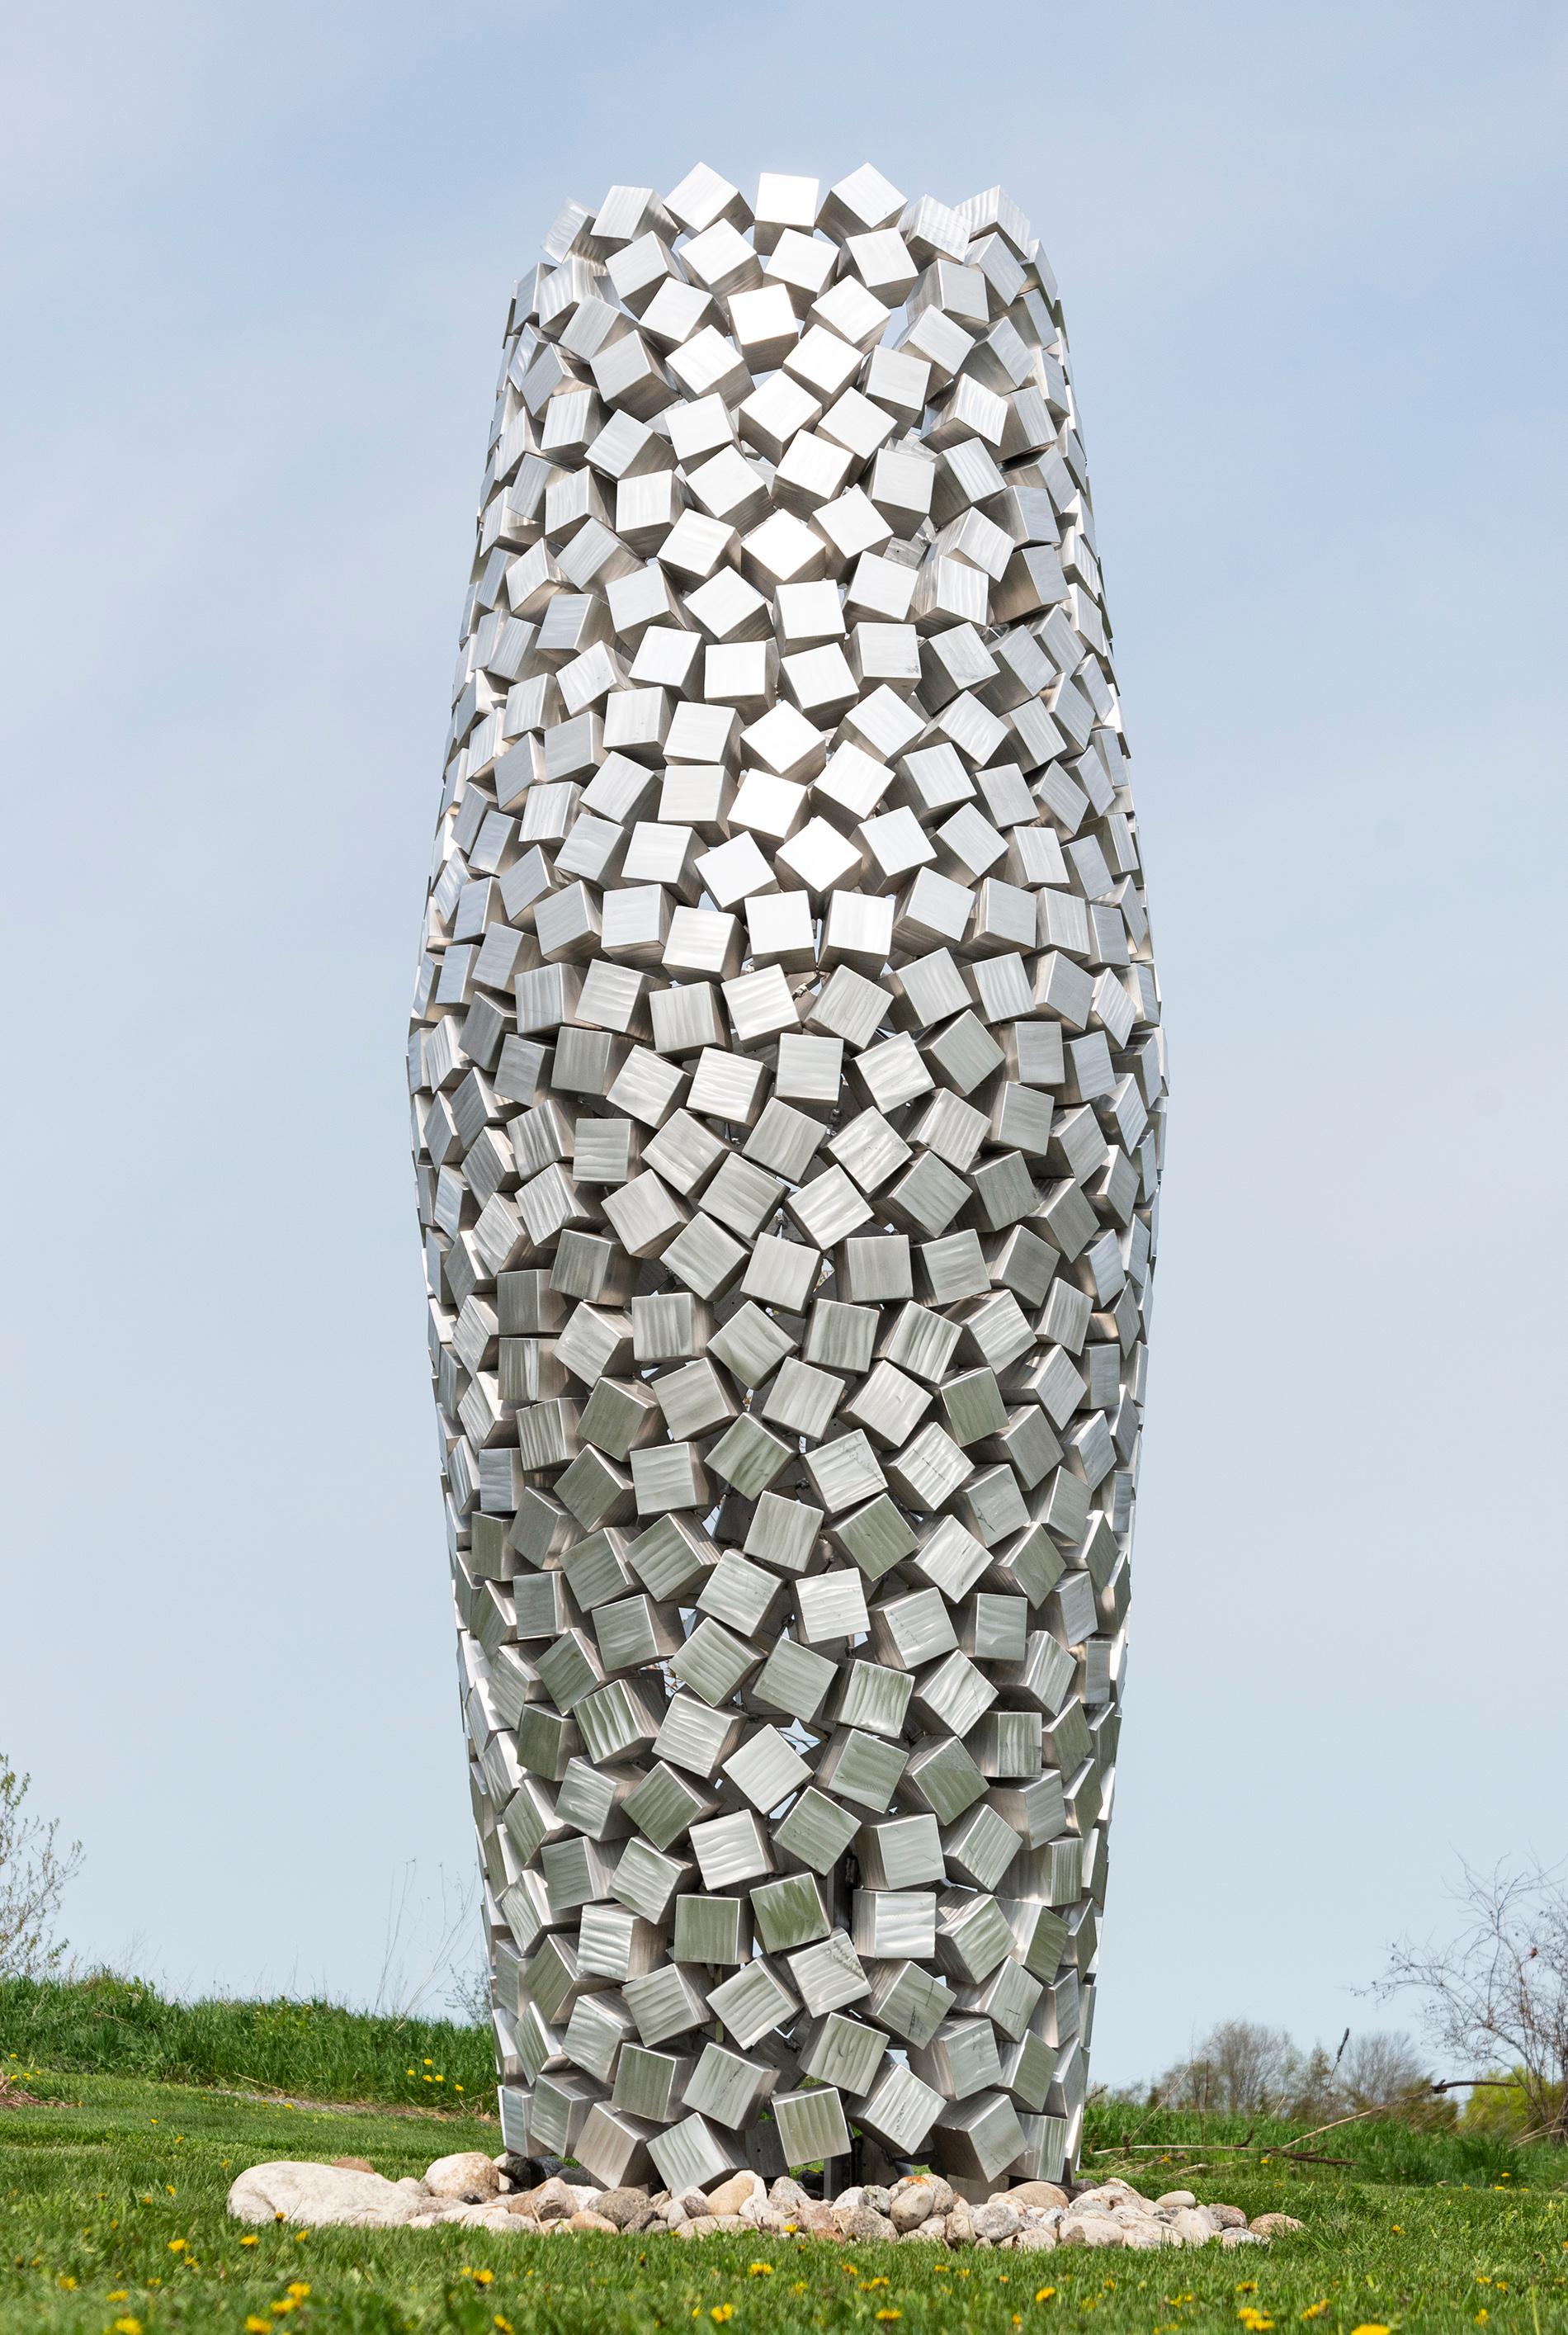 Jean-Pierre Morin Abstract Sculpture - Cones 690 - tall, geometric abstract, polished aluminum outdoor sculpture